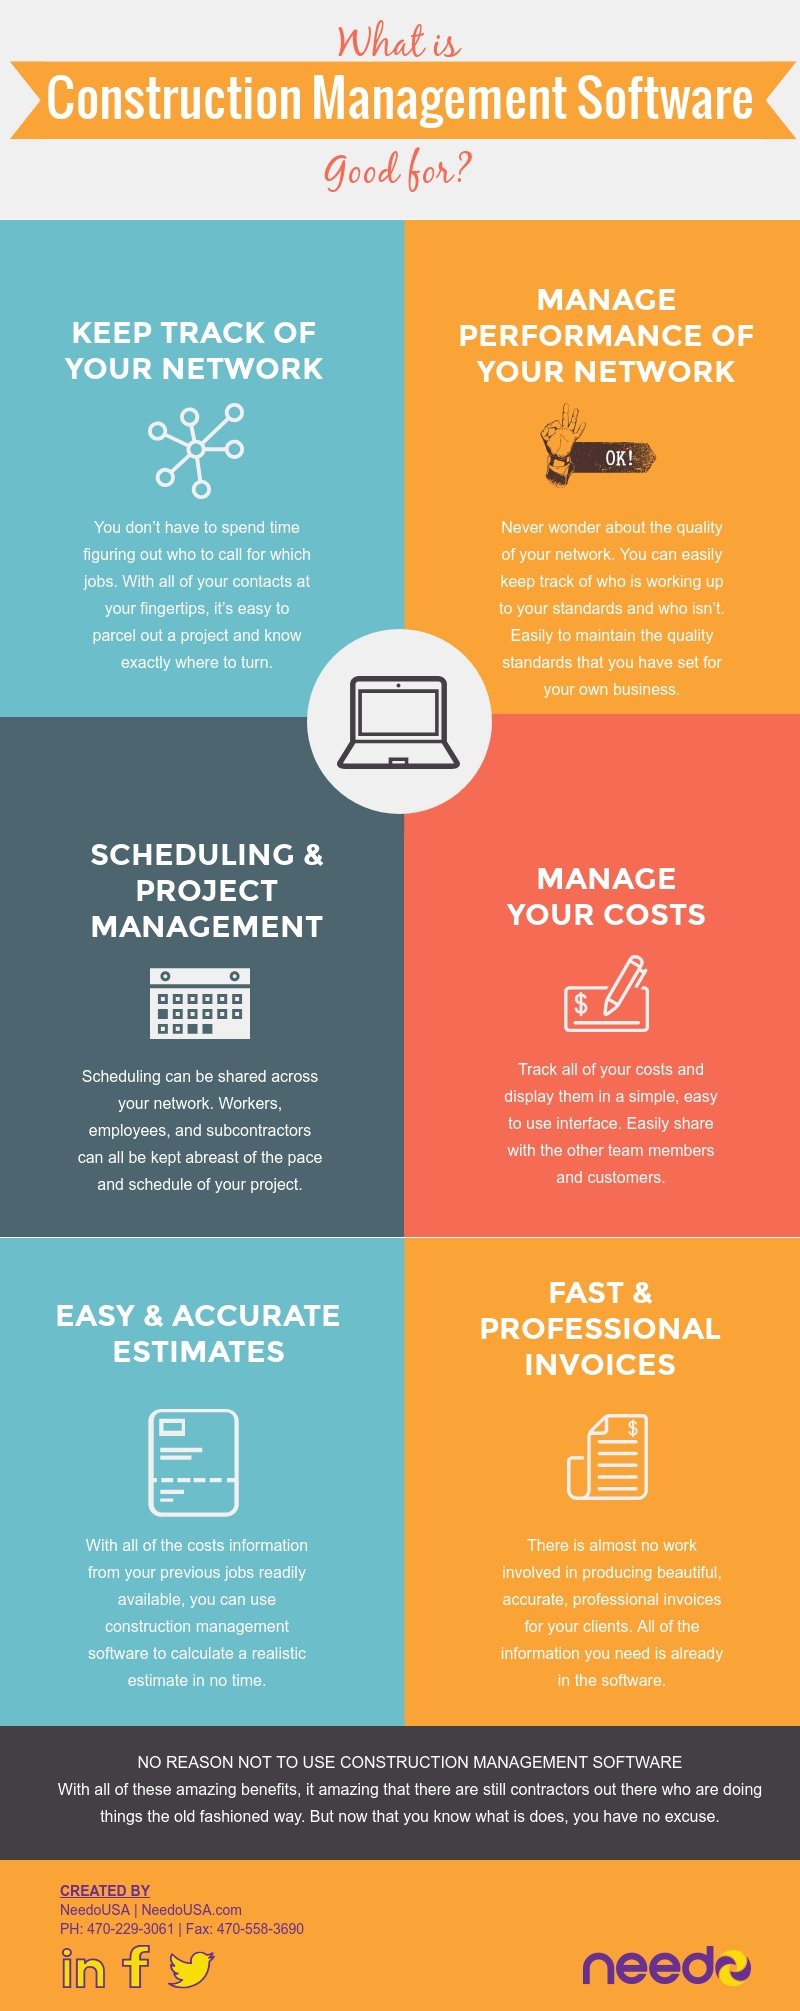 What is Construction Management Software Good For? [infographic]